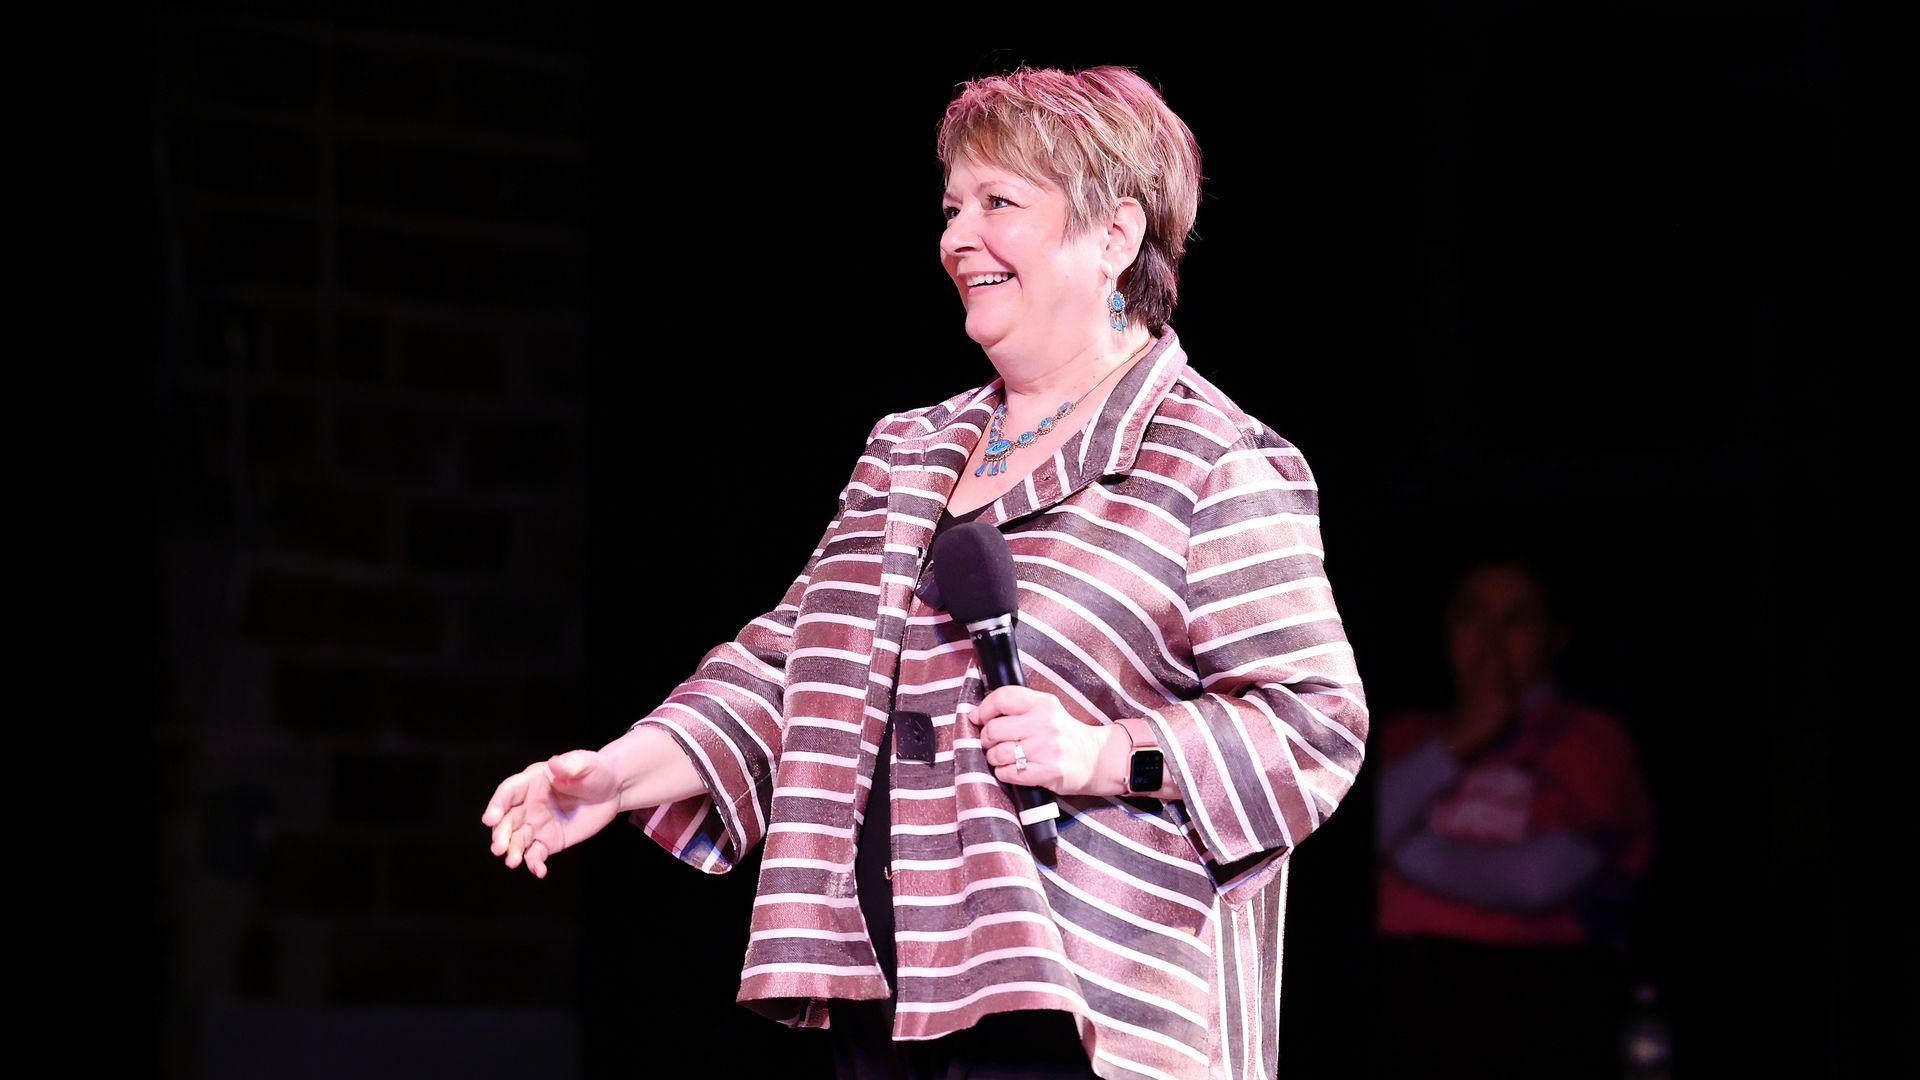 Picture of Janet Protasiewicz wearing a pink and purple striped jacket and holding a microphone